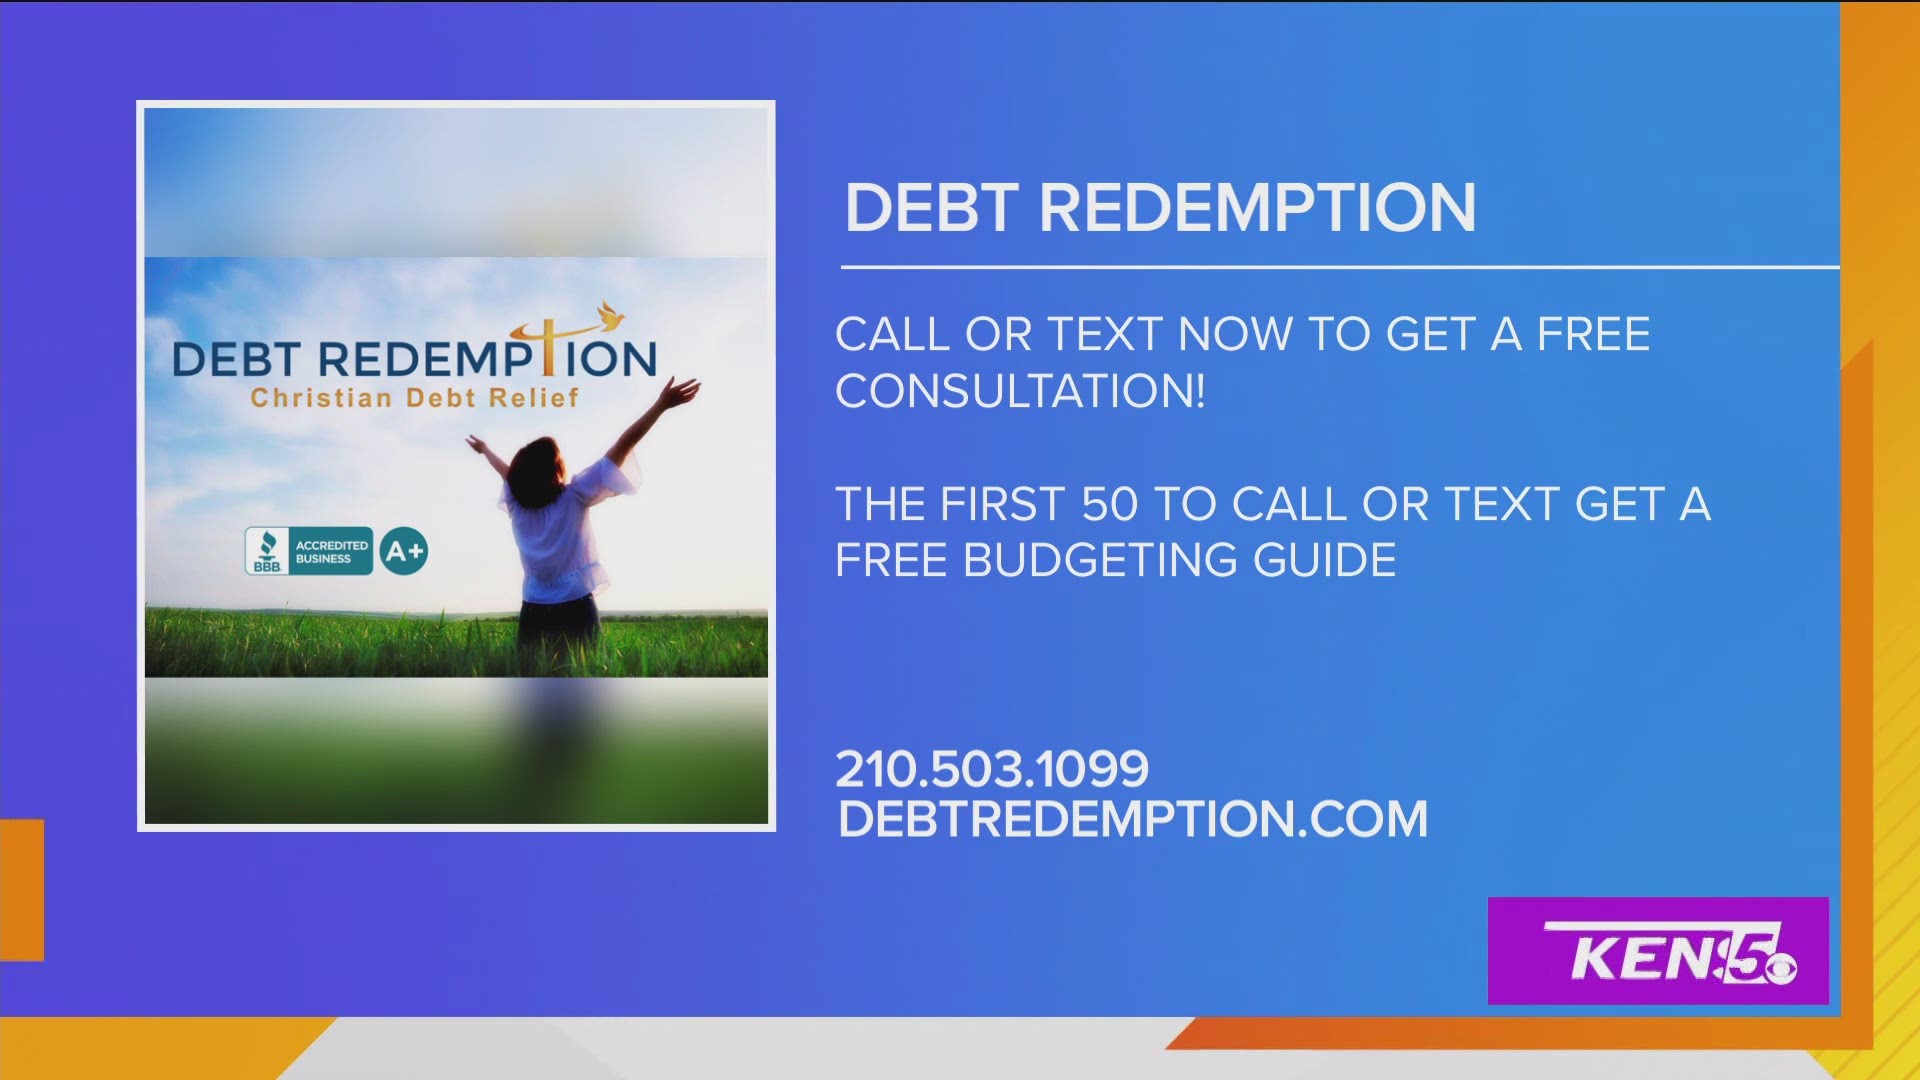 If you're working through mountains of debt, Debt Redemption has credit counselors who can assist your needs.